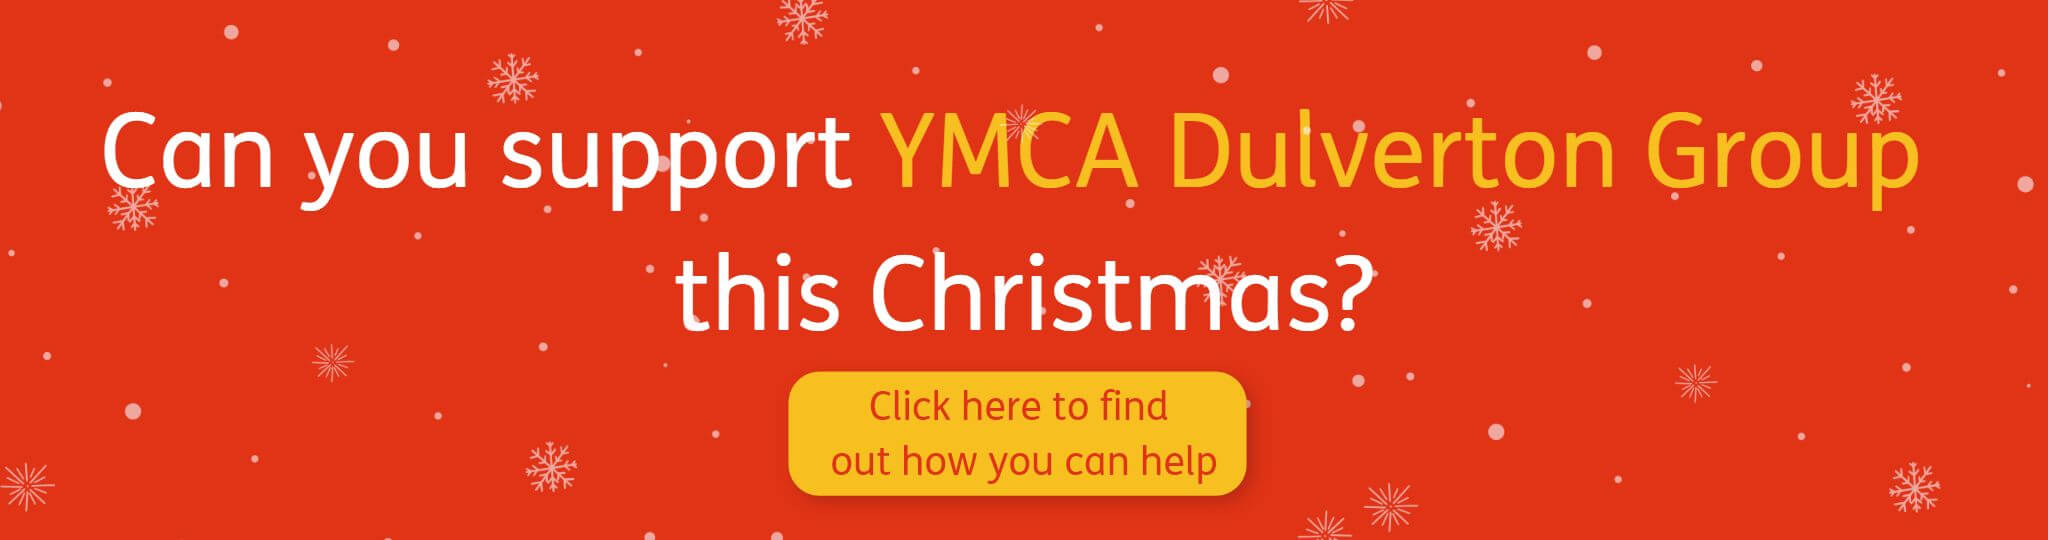 Can you support YMCA Dulverton Group this Christmas?